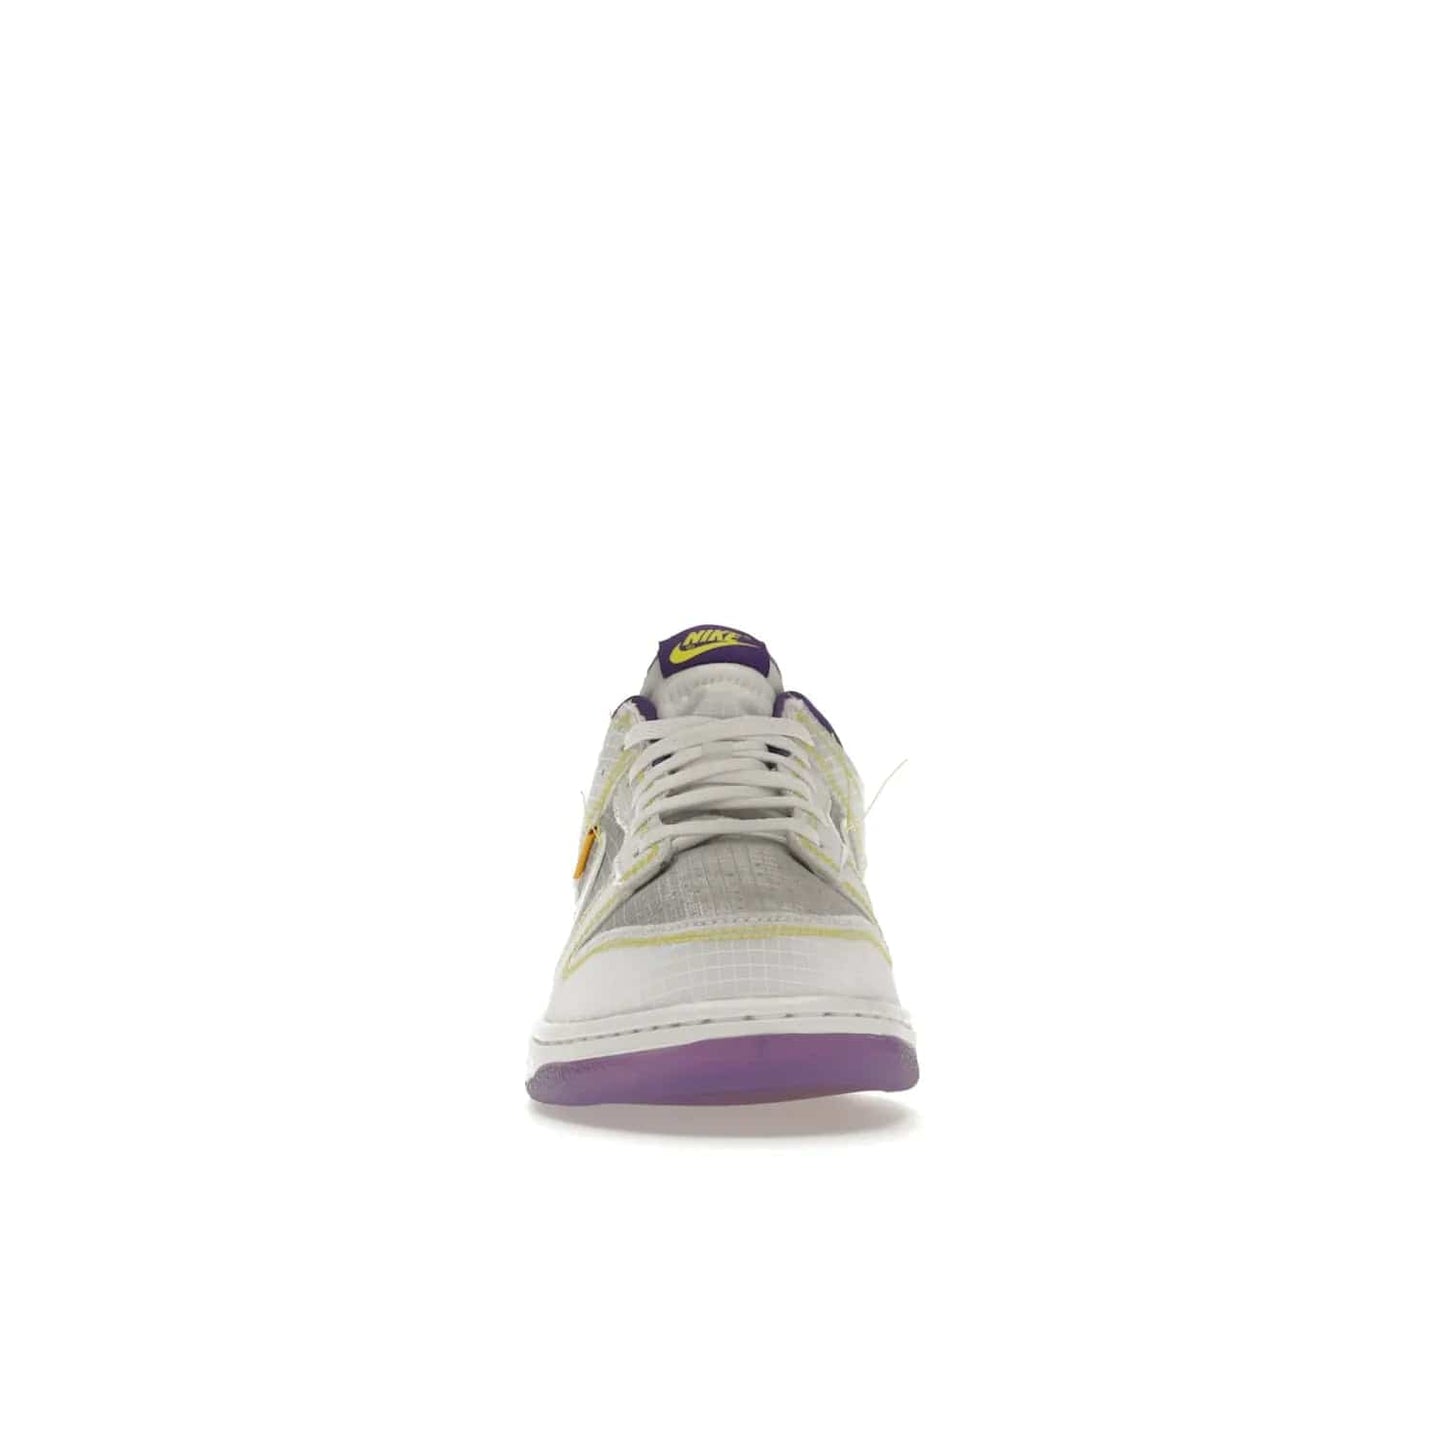 Nike Dunk Low Union Passport Pack Court Purple - Image 10 - Only at www.BallersClubKickz.com - Nike Dunk Low Union LA Passport Pack Court Purple features Court Purple and white smooth leather construction and Union LA Frontman logo on the heel. Releasing in April of 2022, this iconic shoe will make a splash in the streetwear world.